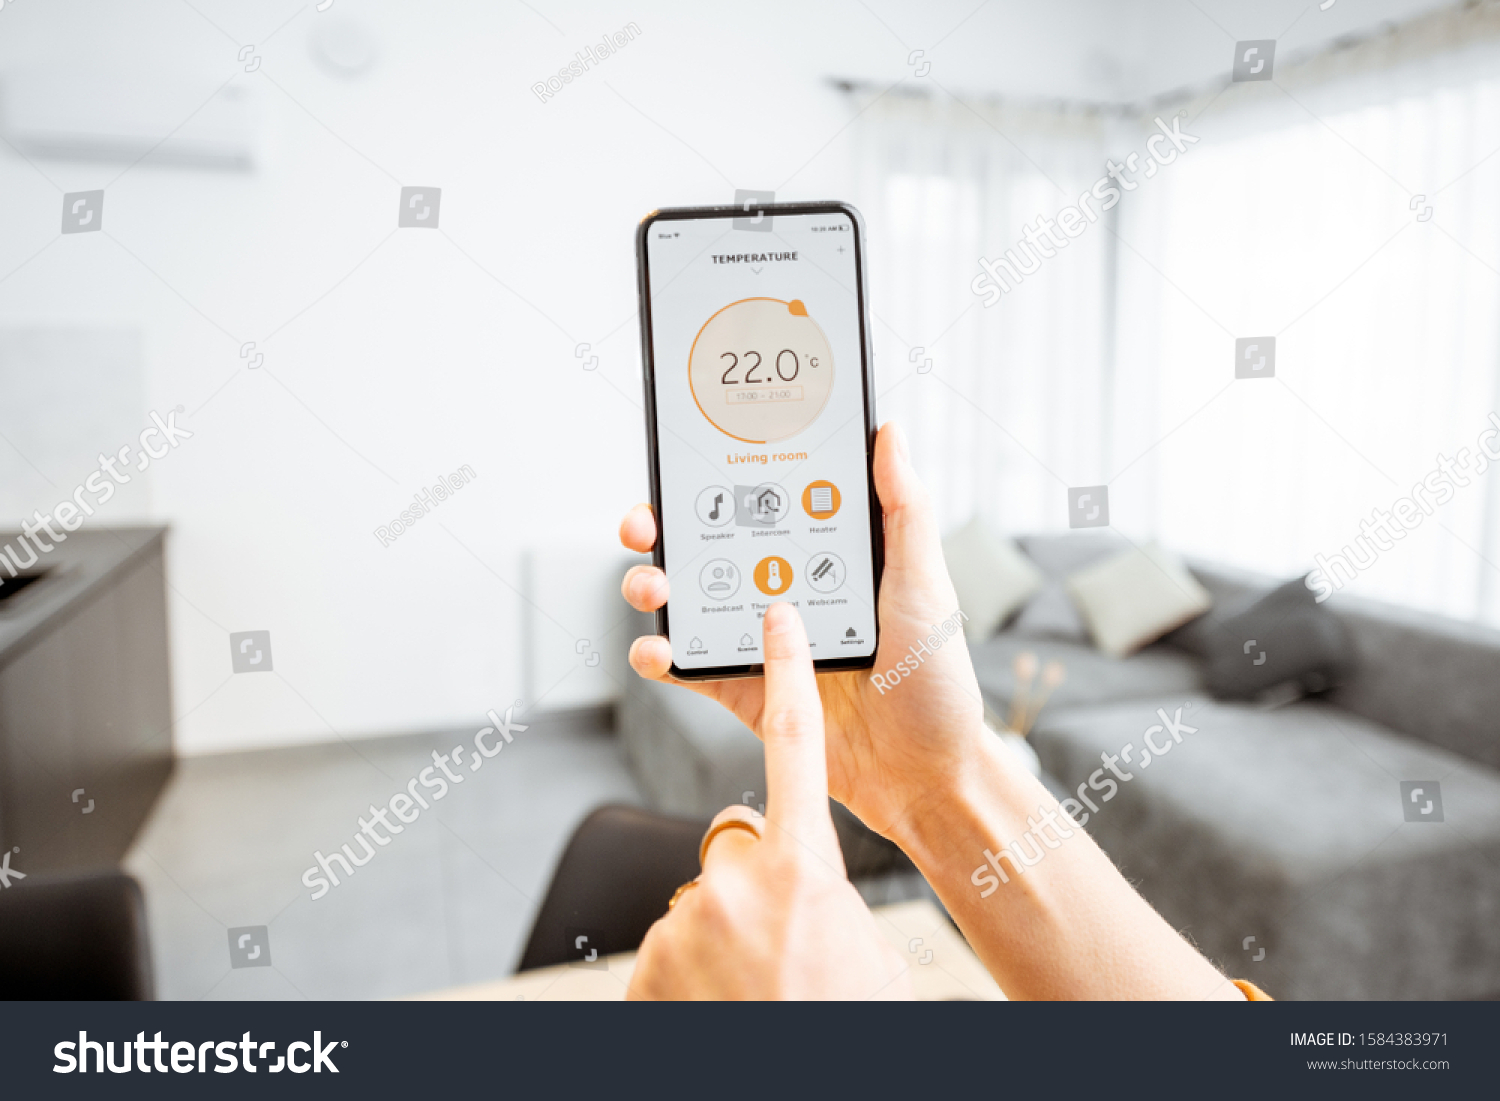 Controlling home heating temperature with a smart home, close-up on phone. Concept of a smart home and mobile application for managing smart devices at home #1584383971